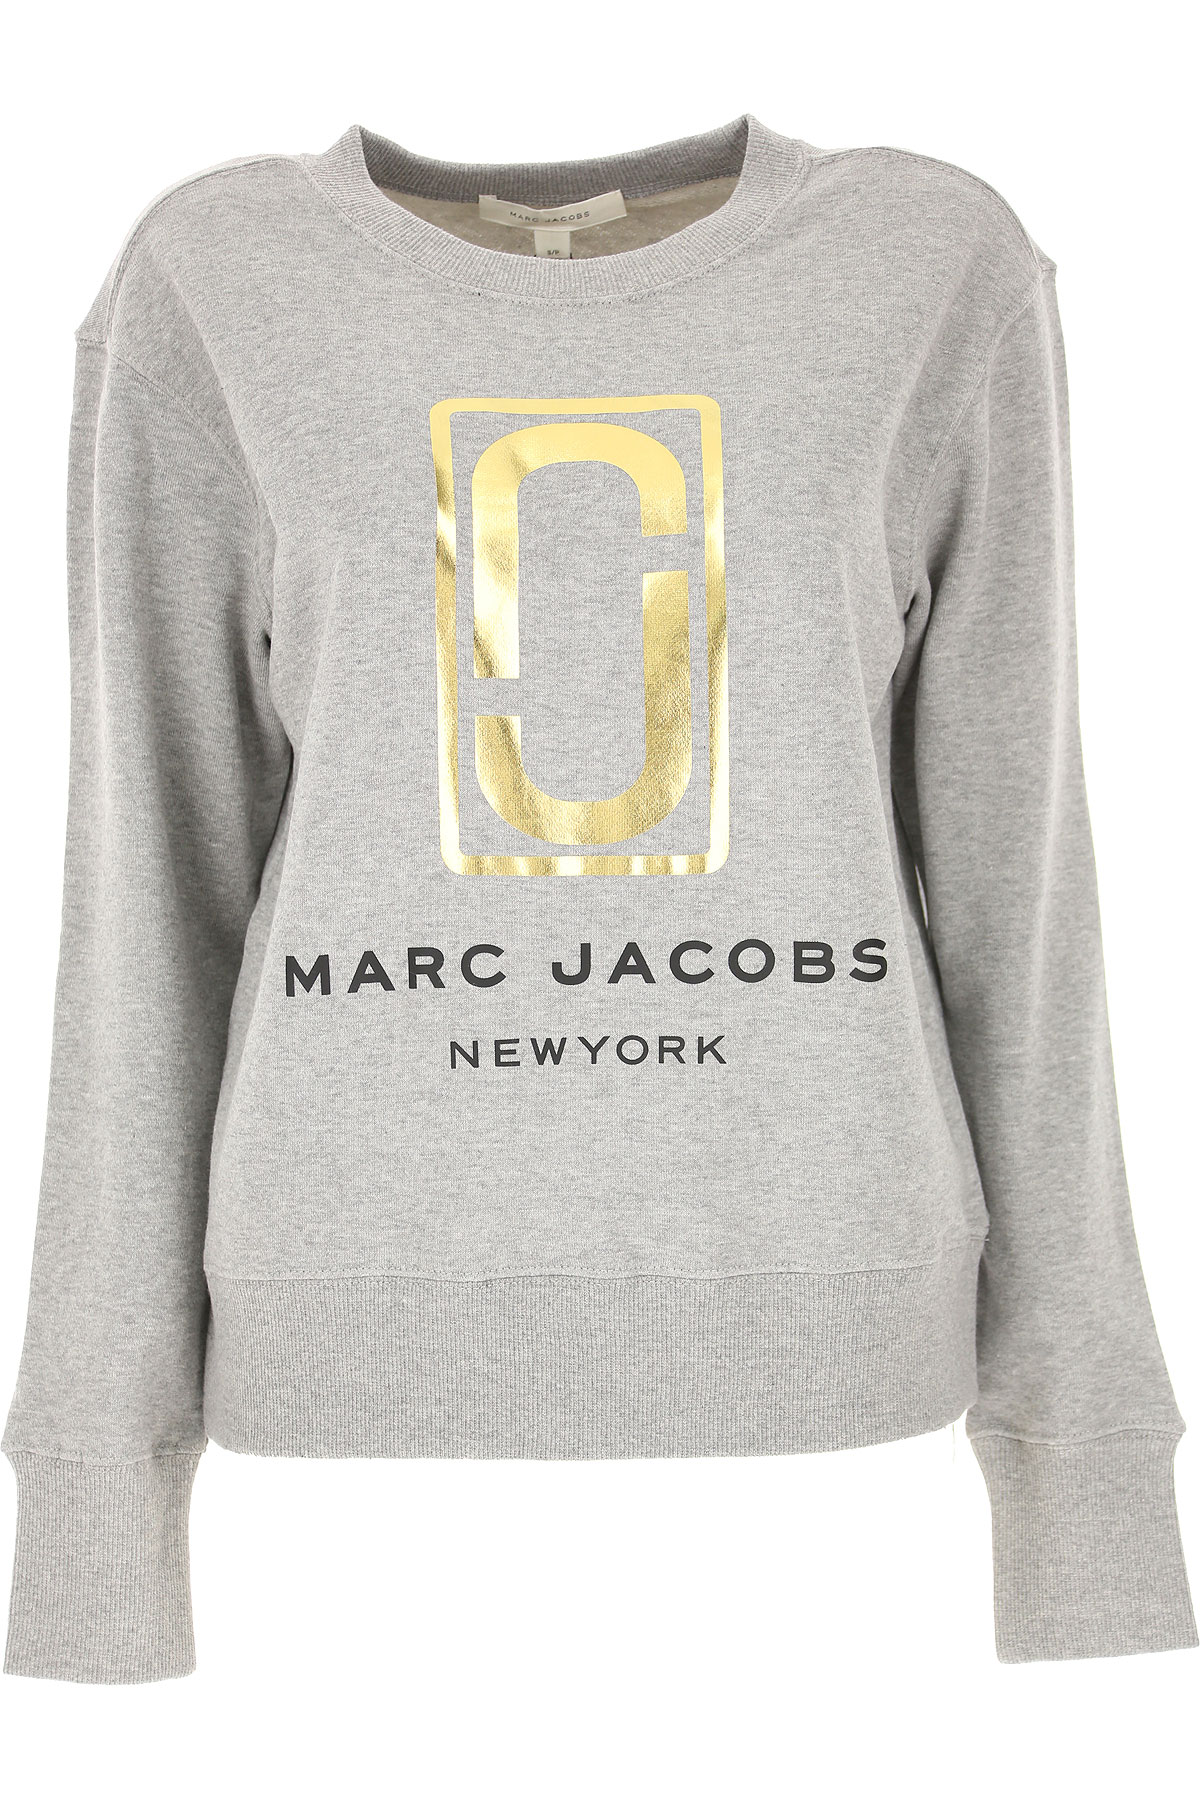 Womens Clothing Marc Jacobs, Style code: m4007051-032-